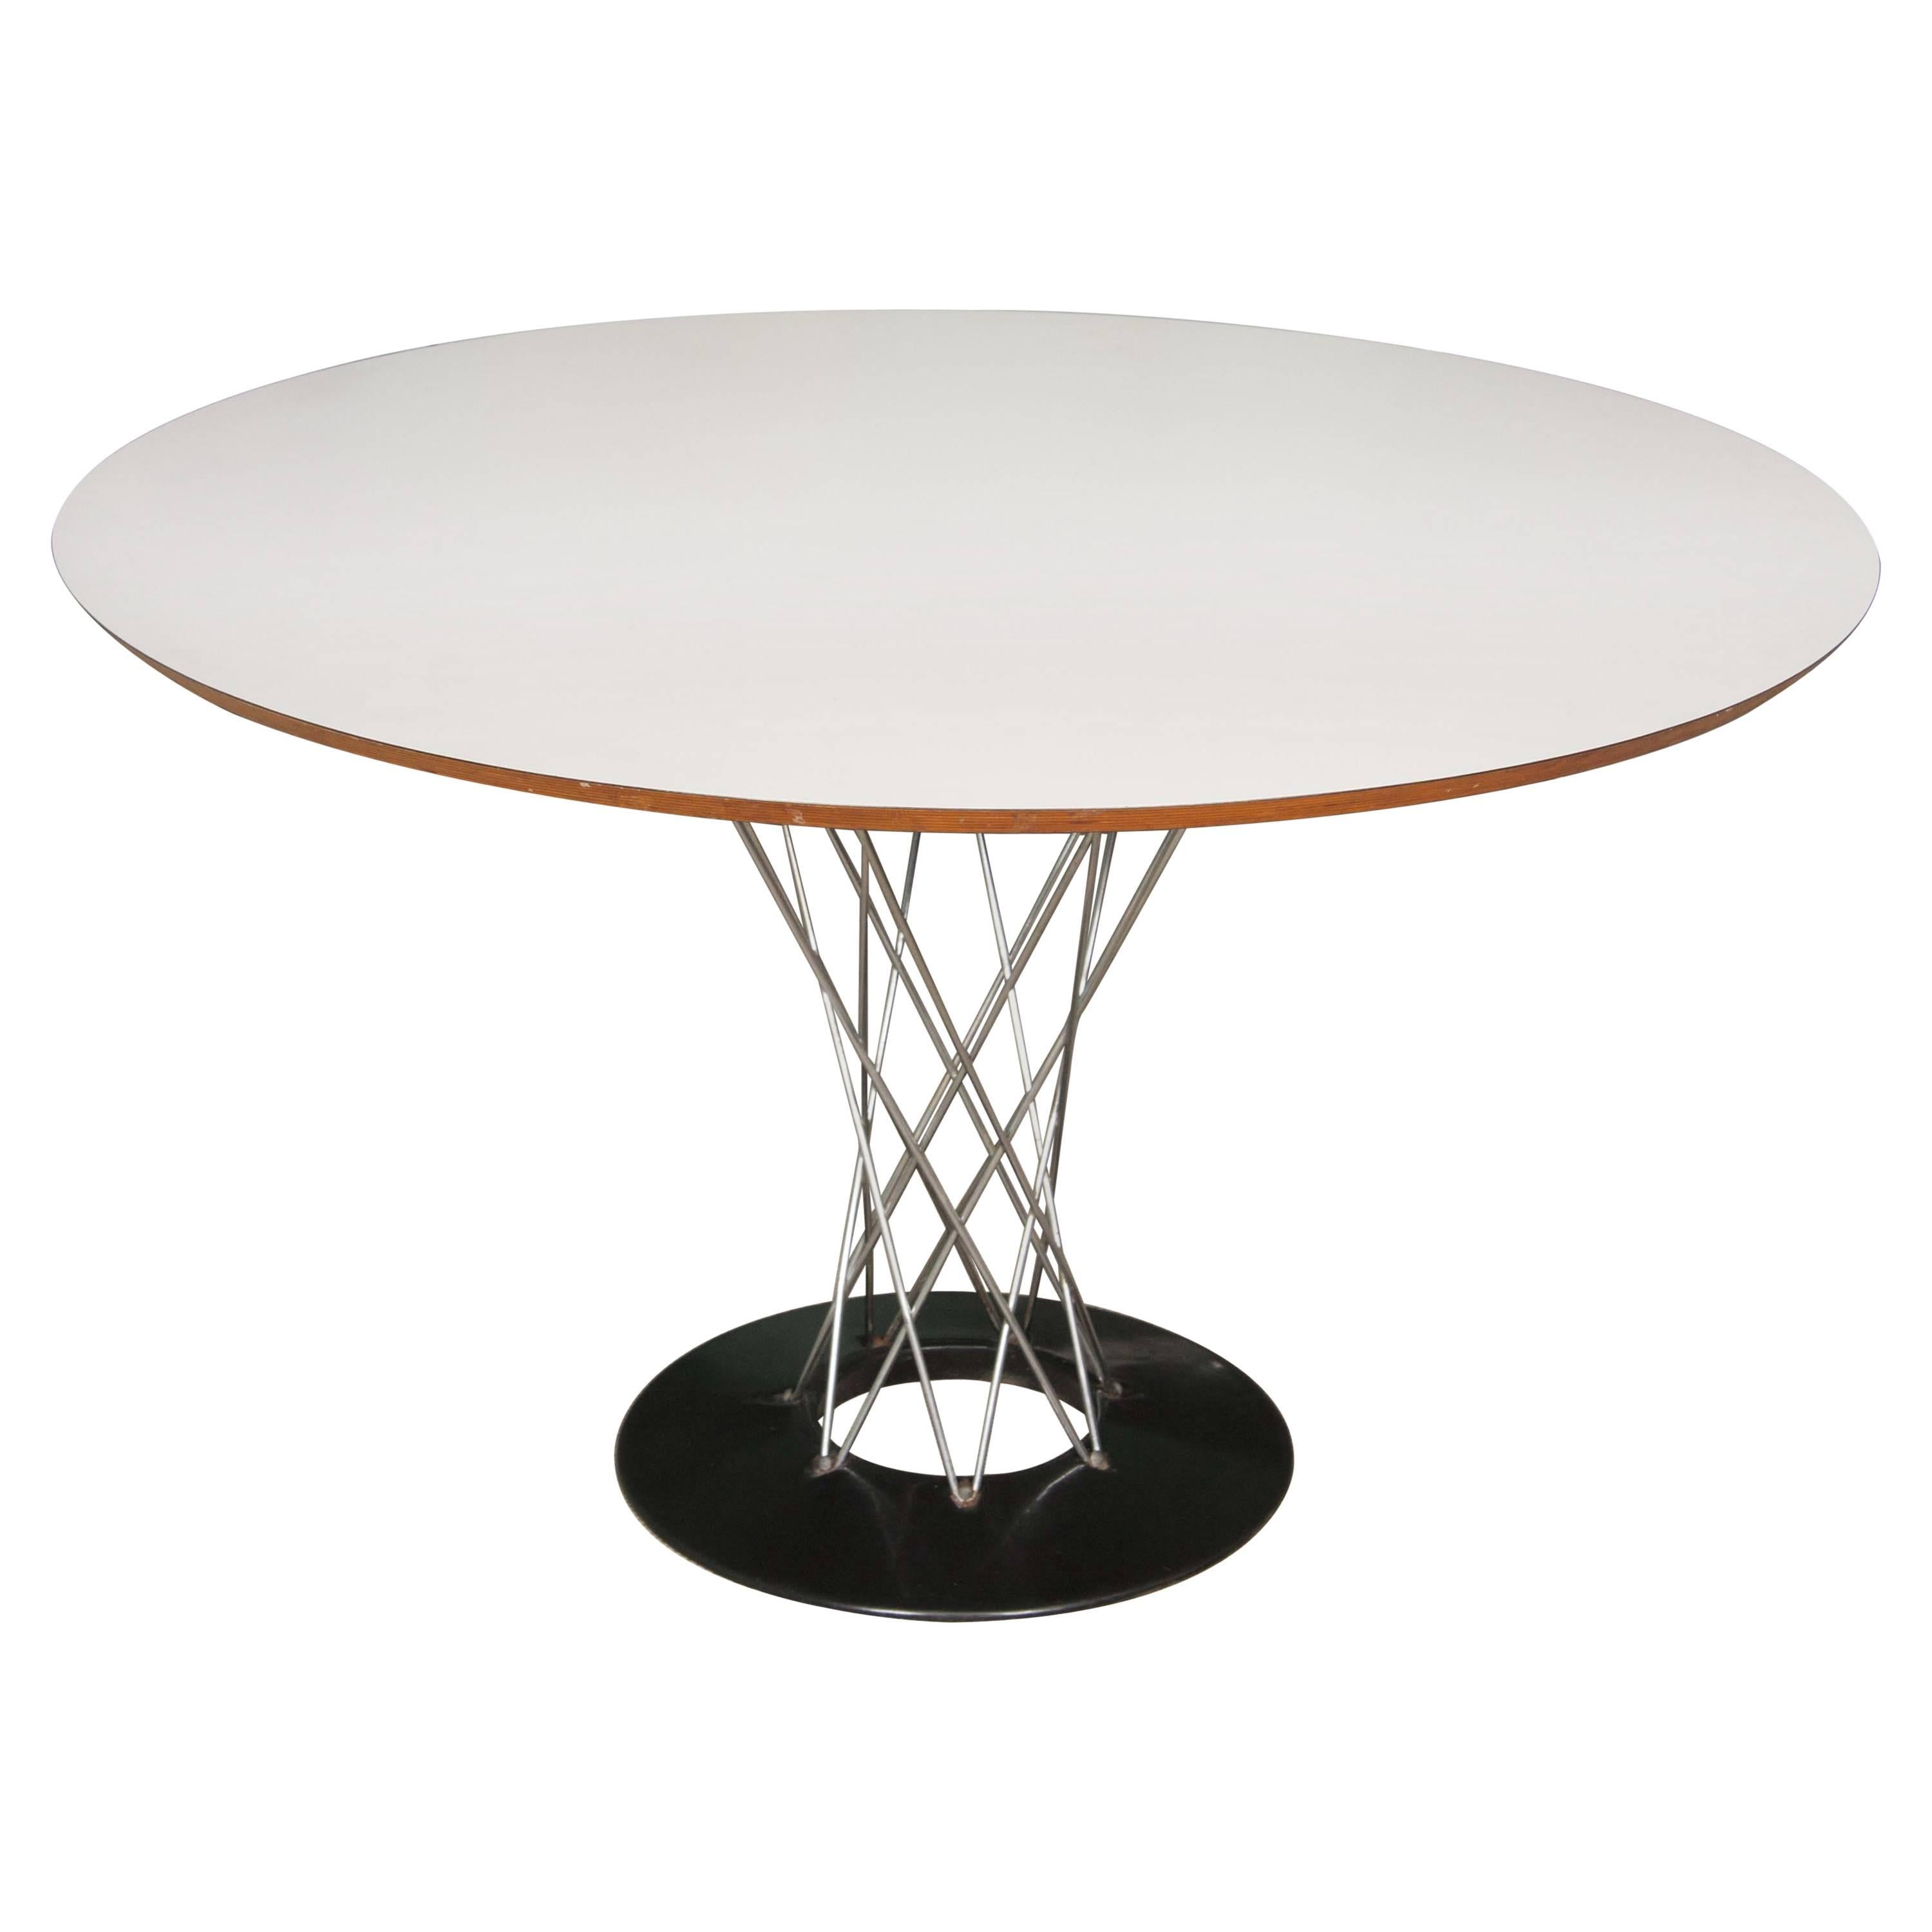 “Cyclone” Table by the Famed Mid-Century Designer Isamu Noguchi for Knoll